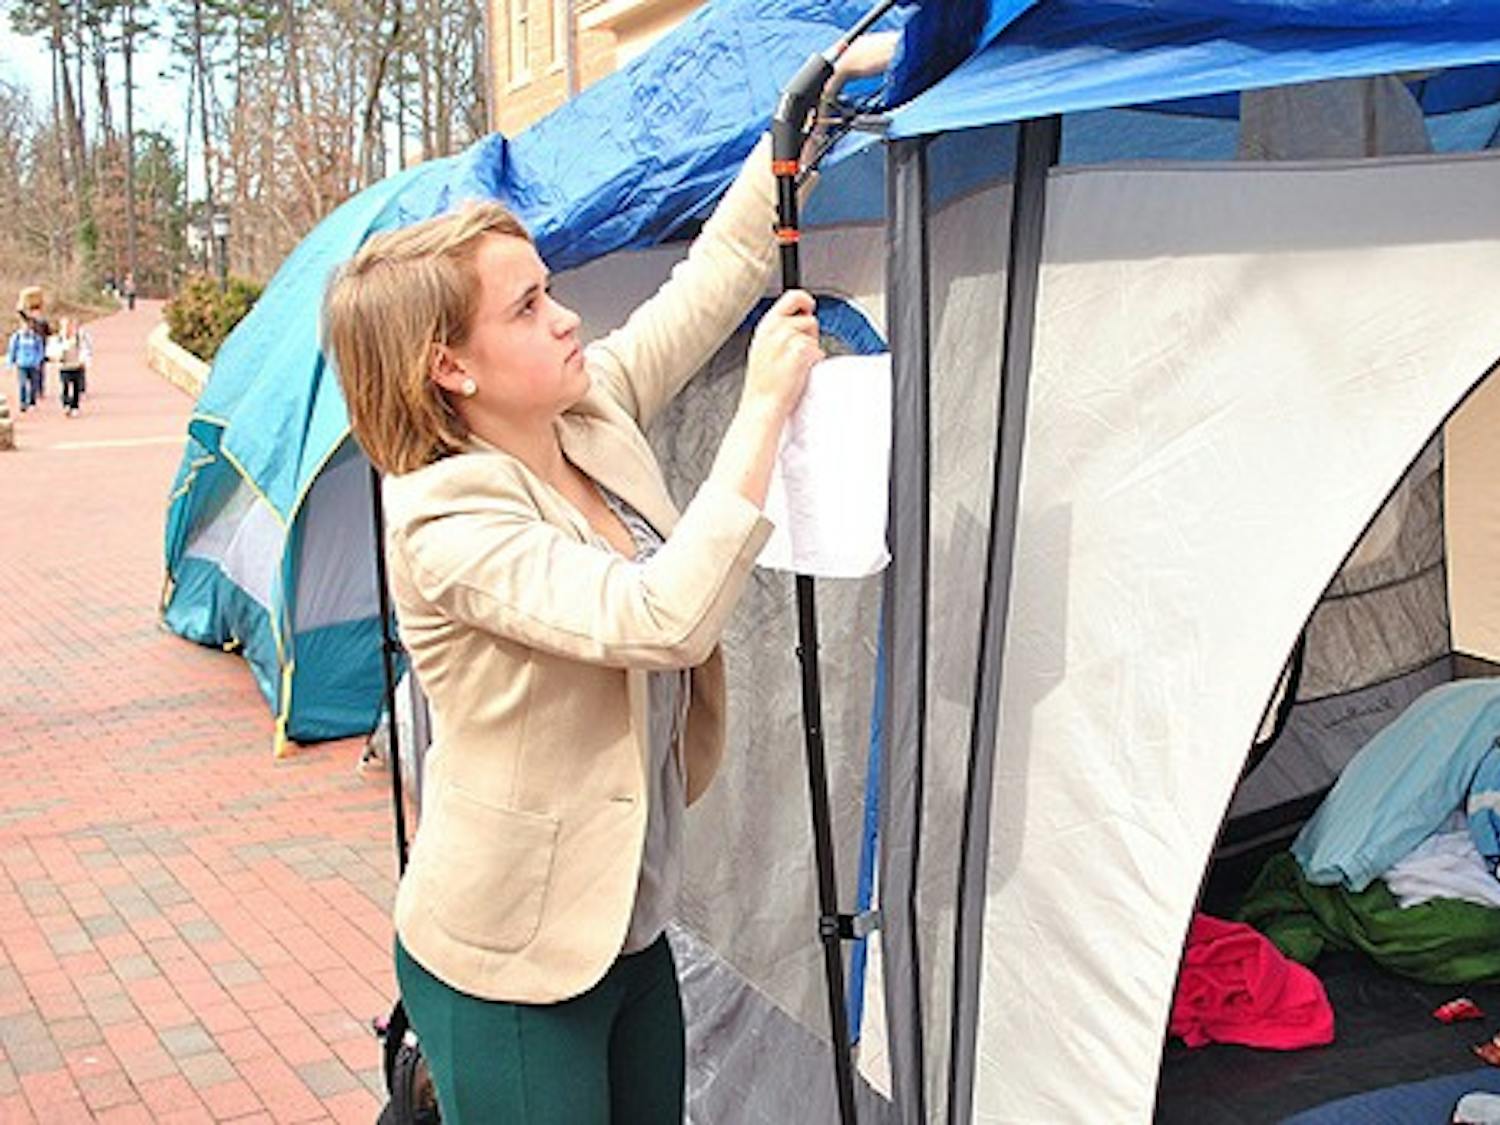 Tents popped up over night to wait in line for the Morrison super suites outside the SASB buildings on South campus. Gabriela Wilberding, a first-year, along with her future suitemates threw up a tent late after the game late last night in order to try and secure a position for one of the limited super suites. They planned to camp out for the full 12 days in order to get the rooms and even slept there last night. However, Gabriela says "We received an email this morning around 10:00 o'clock saying that we couldn't camp out for the suites anymore. It would now be done by a lottery system." After this news spread, the tents slowly began to come back down. 